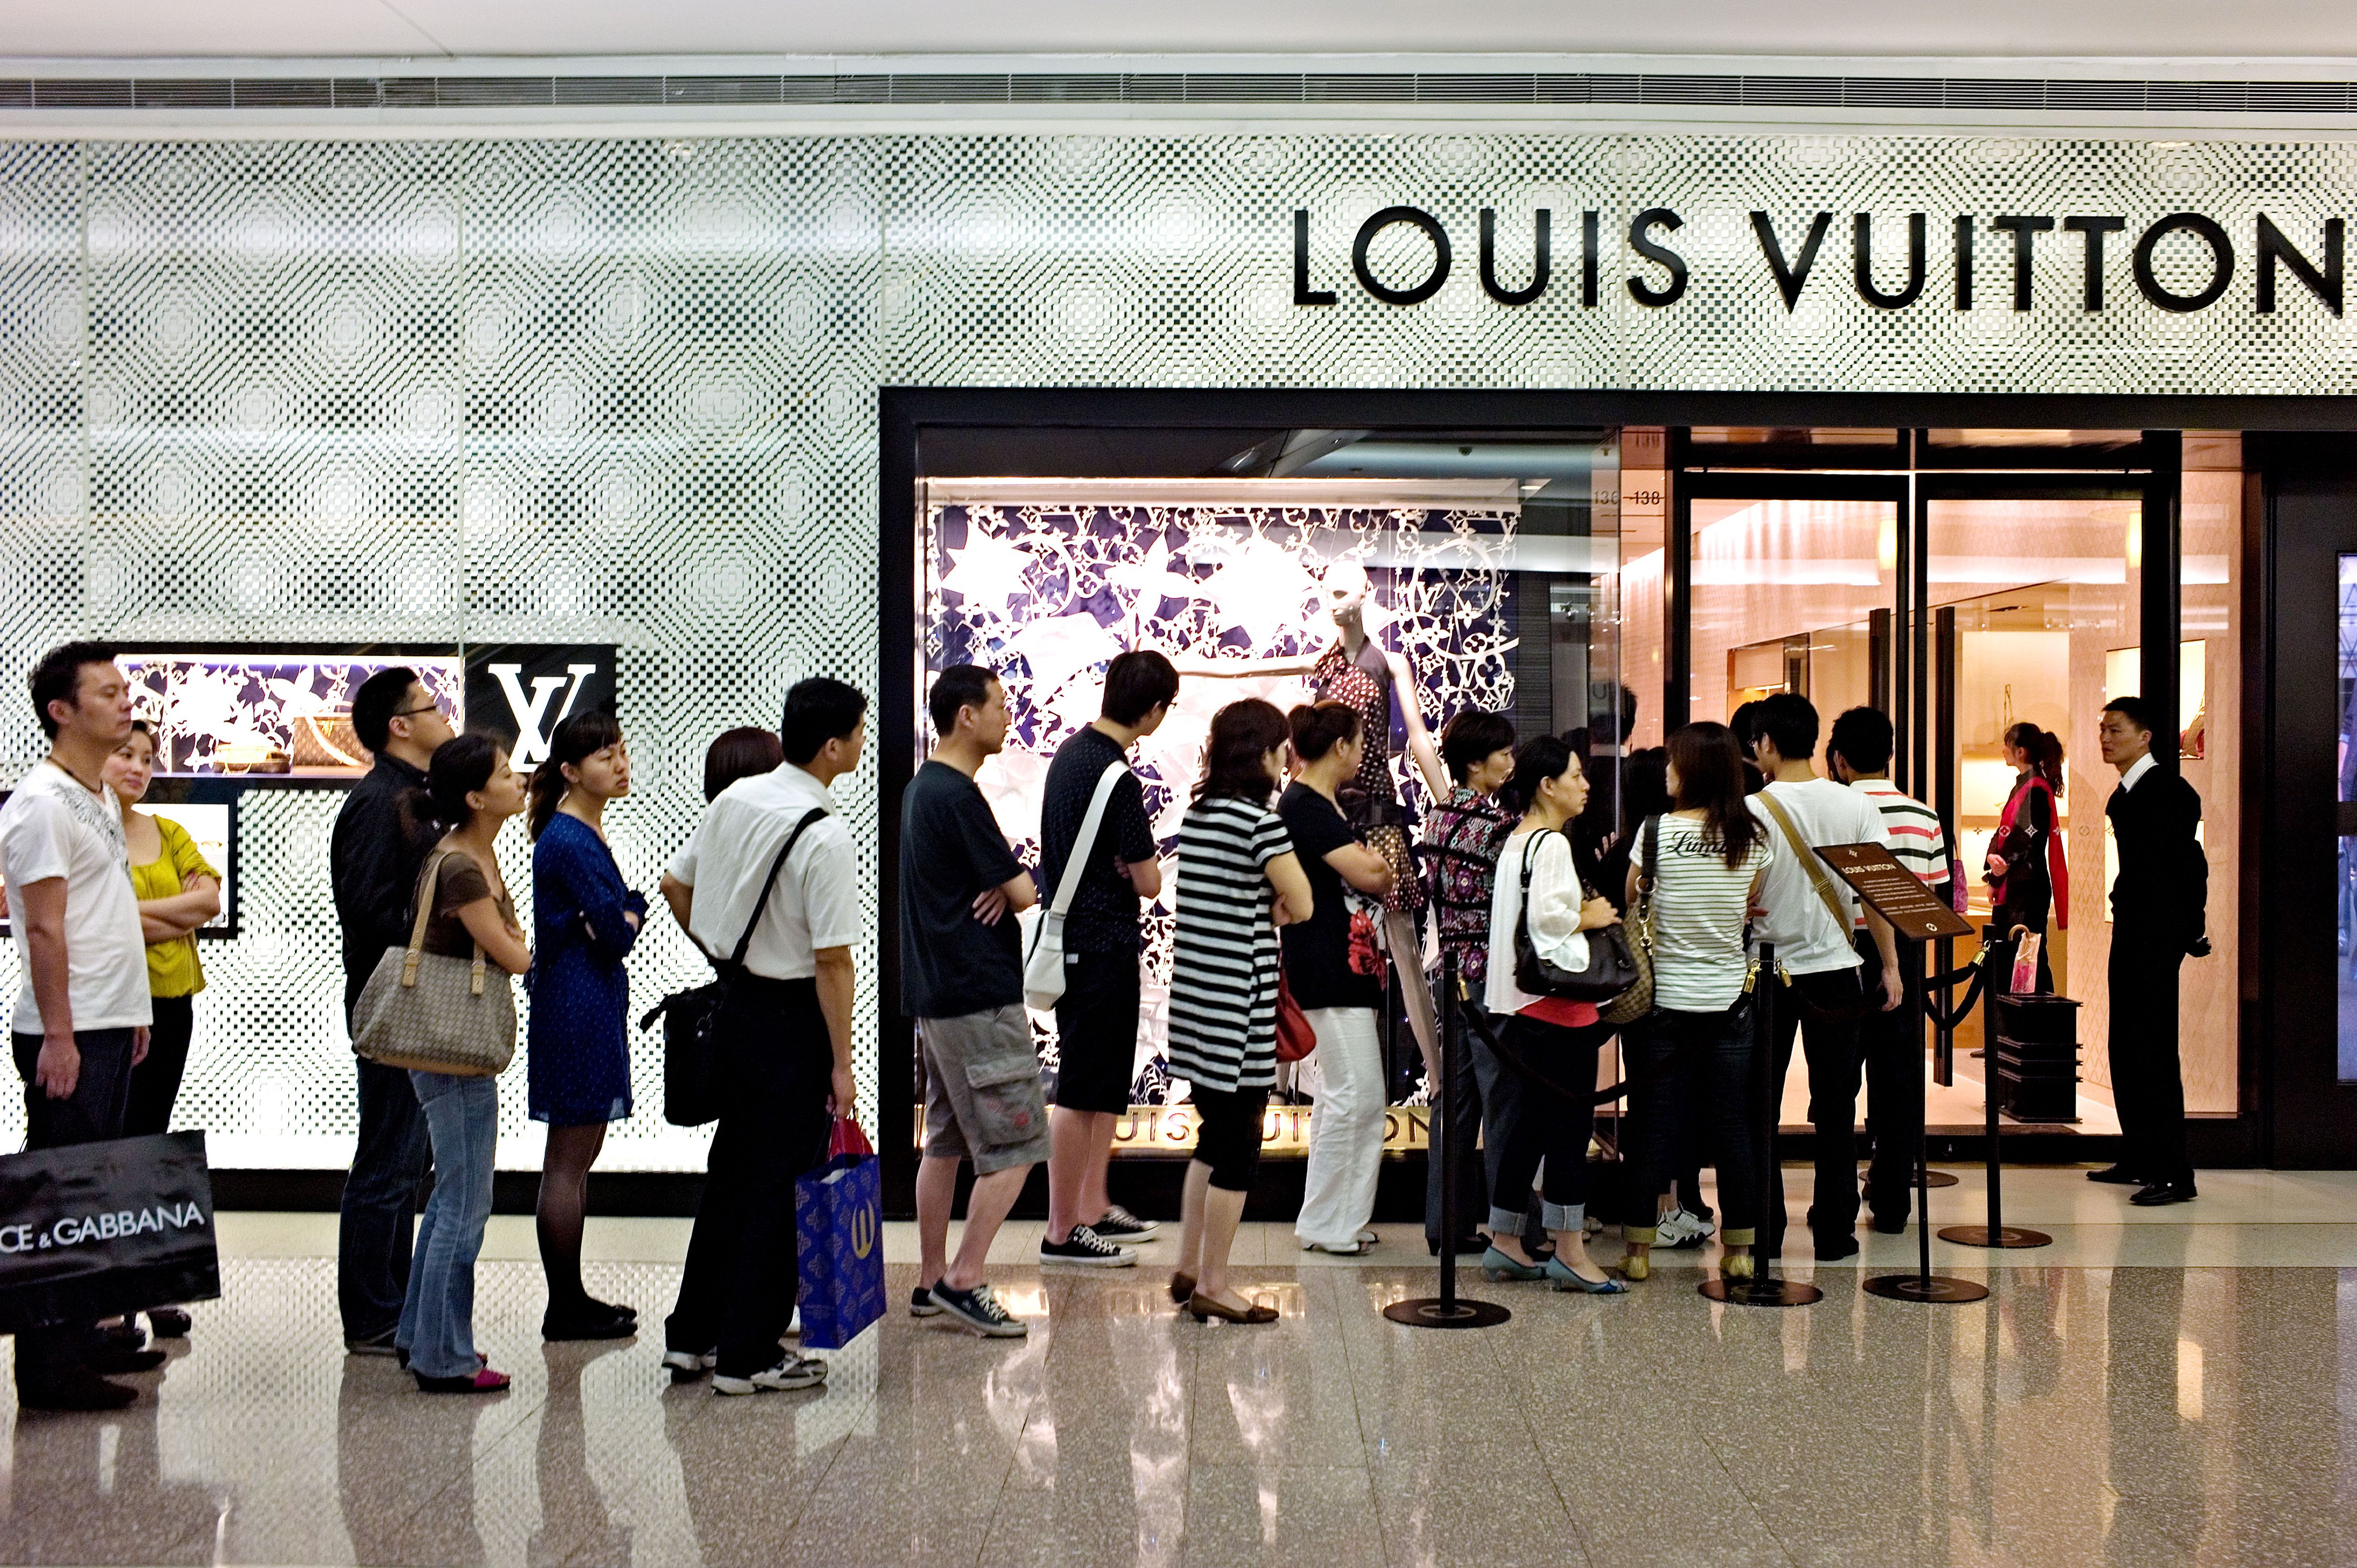 Expert Claims Louis Vuitton is a “Brand for Secretaries” in China